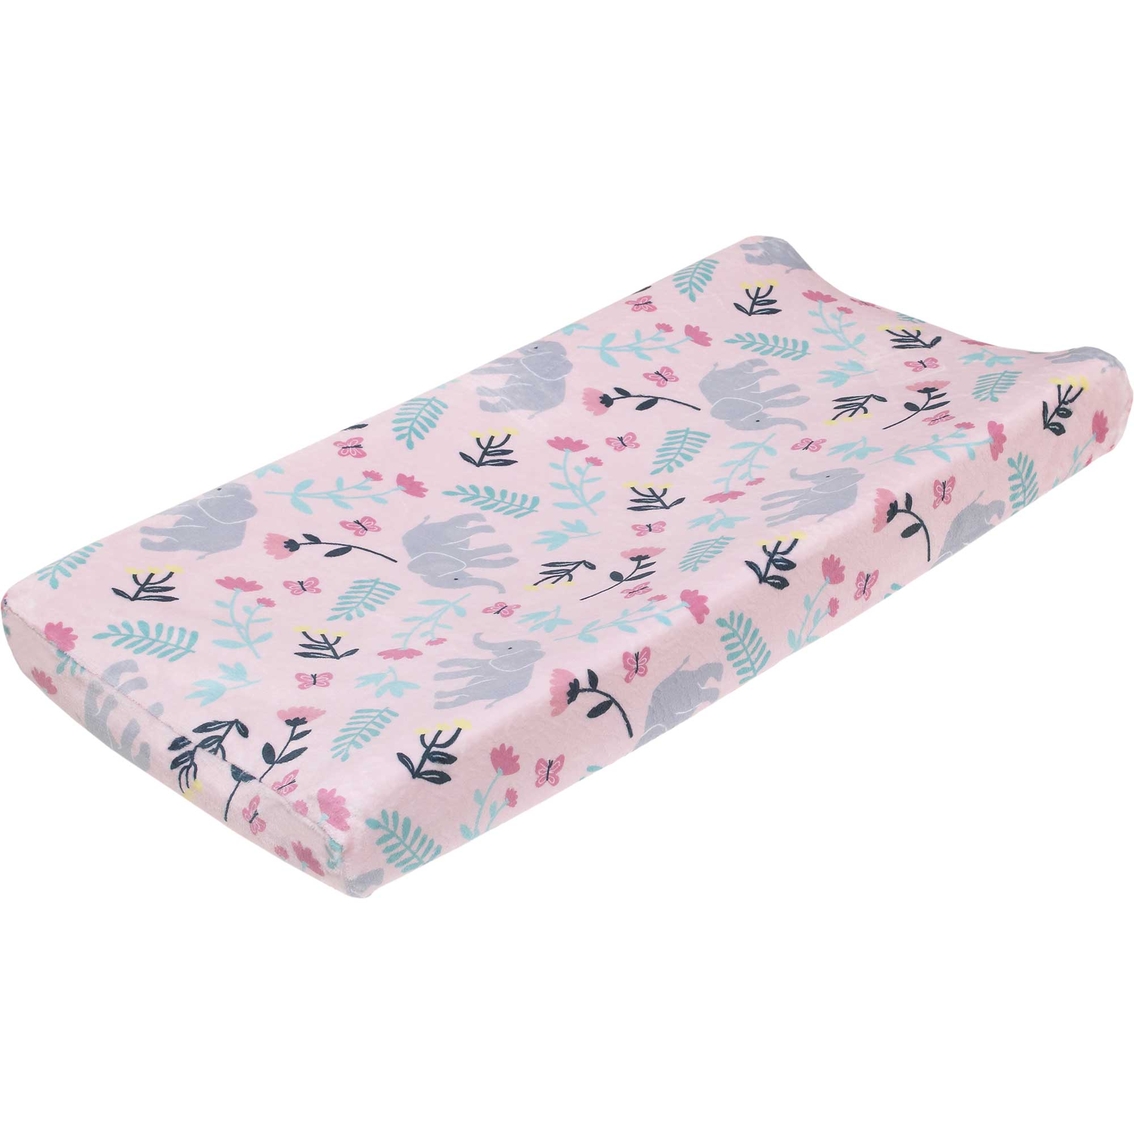 Carter's Floral Elephant Super Soft Changing Pad Cover - Image 1 of 3